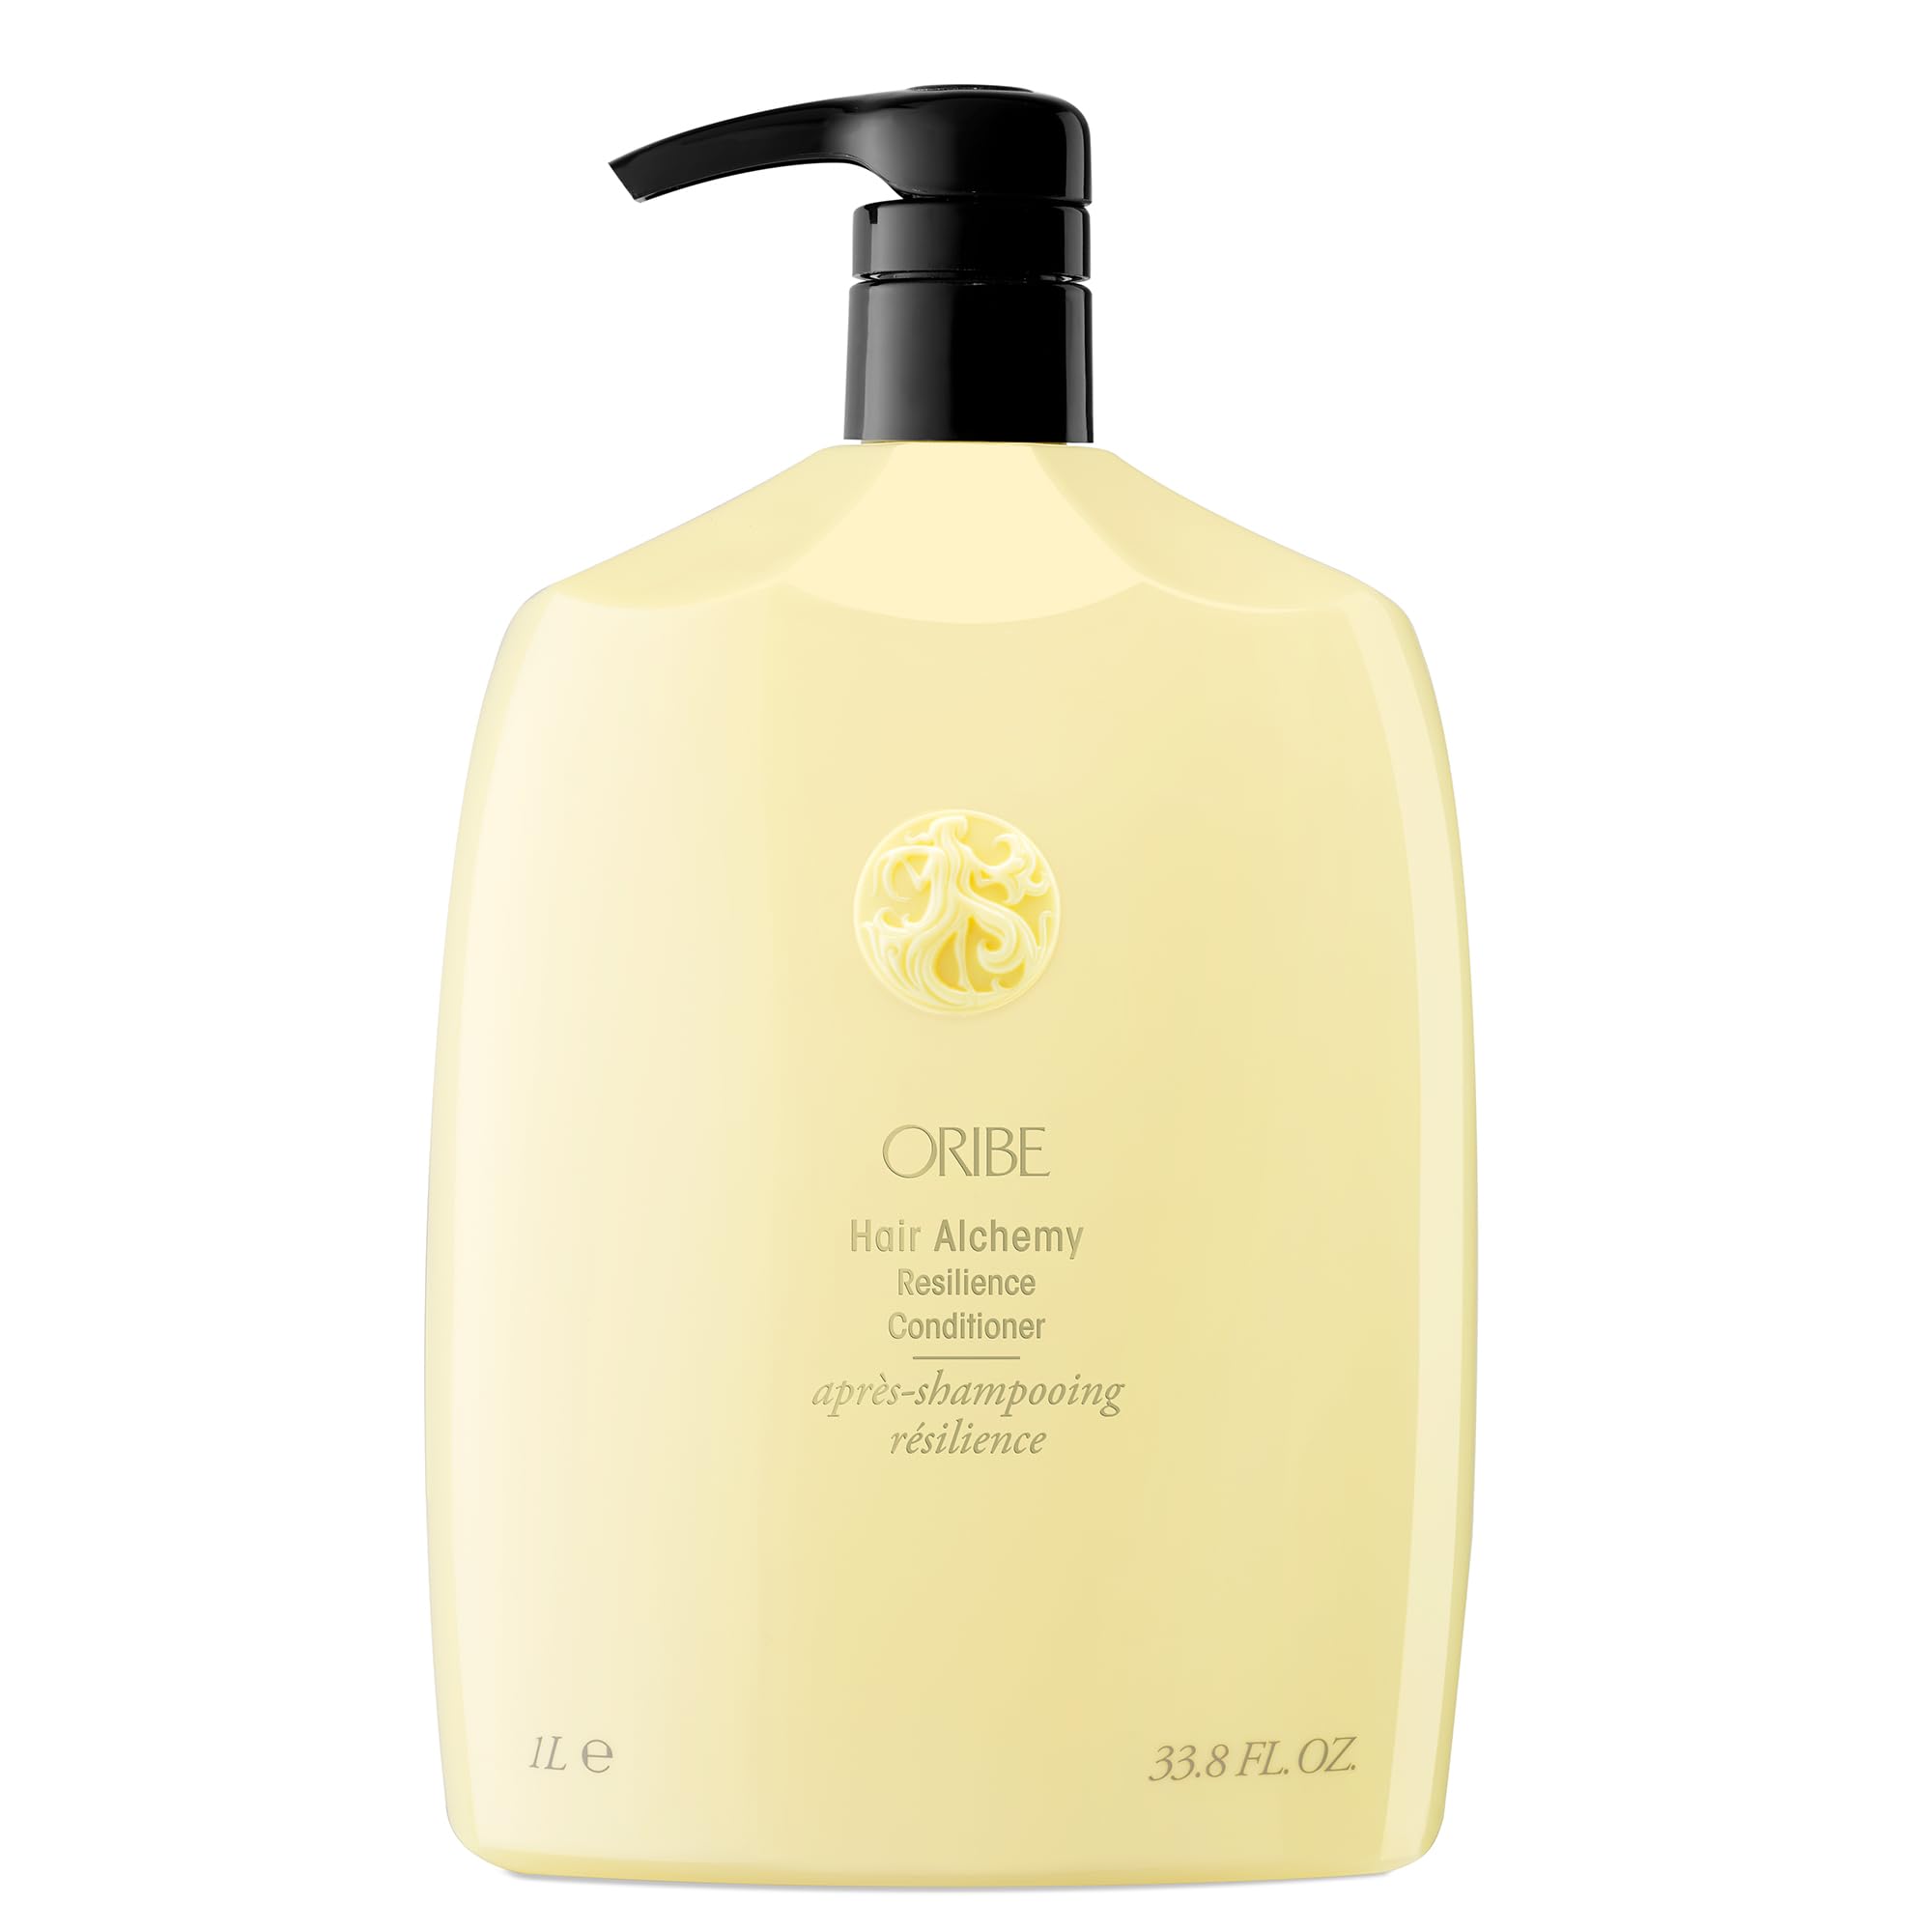 ORIBE Hair Alchemy Resilience Conditioner Liter